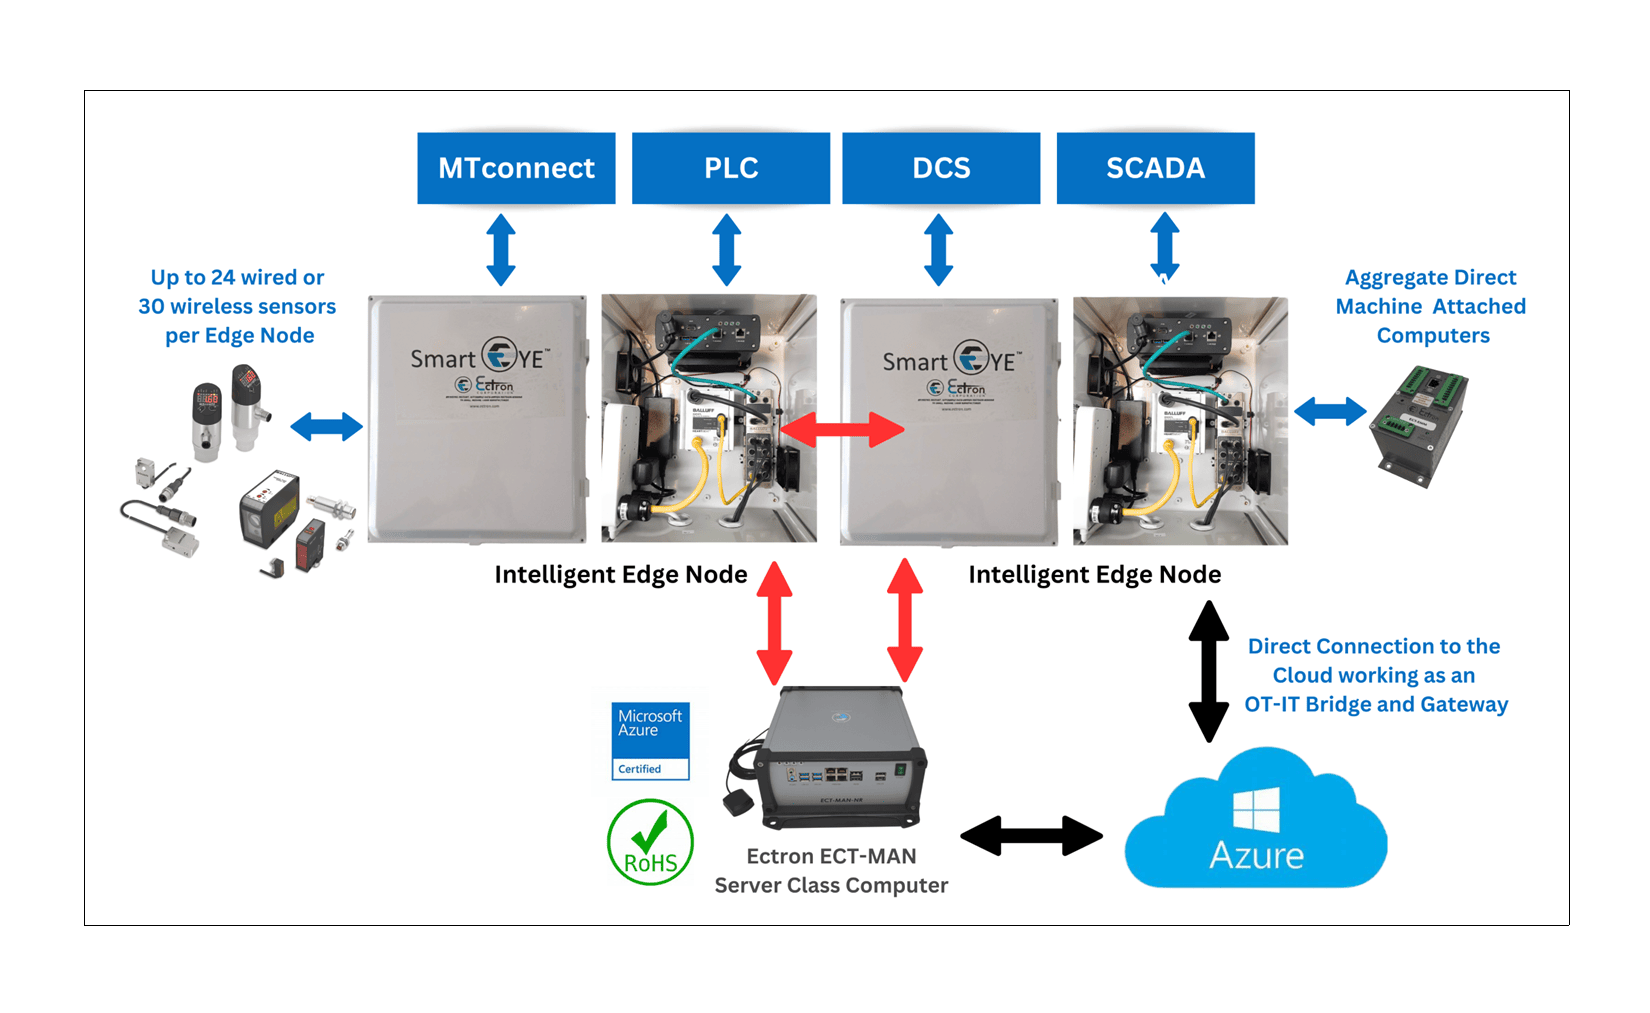 Ectron's Intelligent Edge Node with Artificial Intelligence and Machine Learning Capabilities for Data Collection and Data Analytics on the Edge (Edge Computing and Edge Computers)